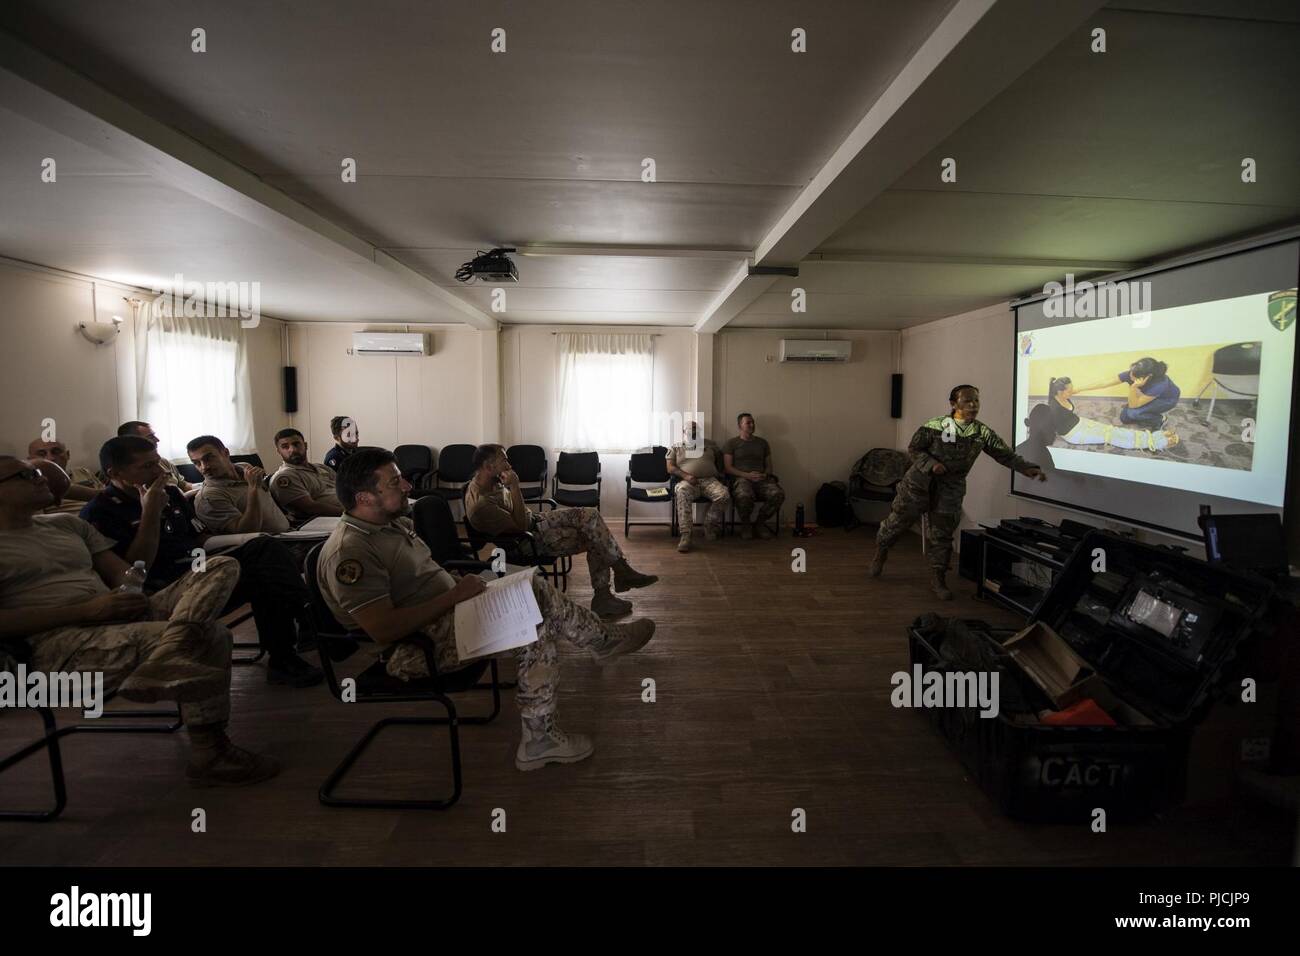 U.S. Army Capt Stacey Suttles, a physician assistant assigned to the 404th Civil Affairs Battalion, Airborne, leads a block of instruction during the combat lifesaver skills course at the Base Militare Italiana di Supporto, Djibouti, July 20, 2018. The joint-coalition force CLS training provided an opportunity to teach new combat life saving procedures, while strengthening operational capabilities between both nations. Stock Photo